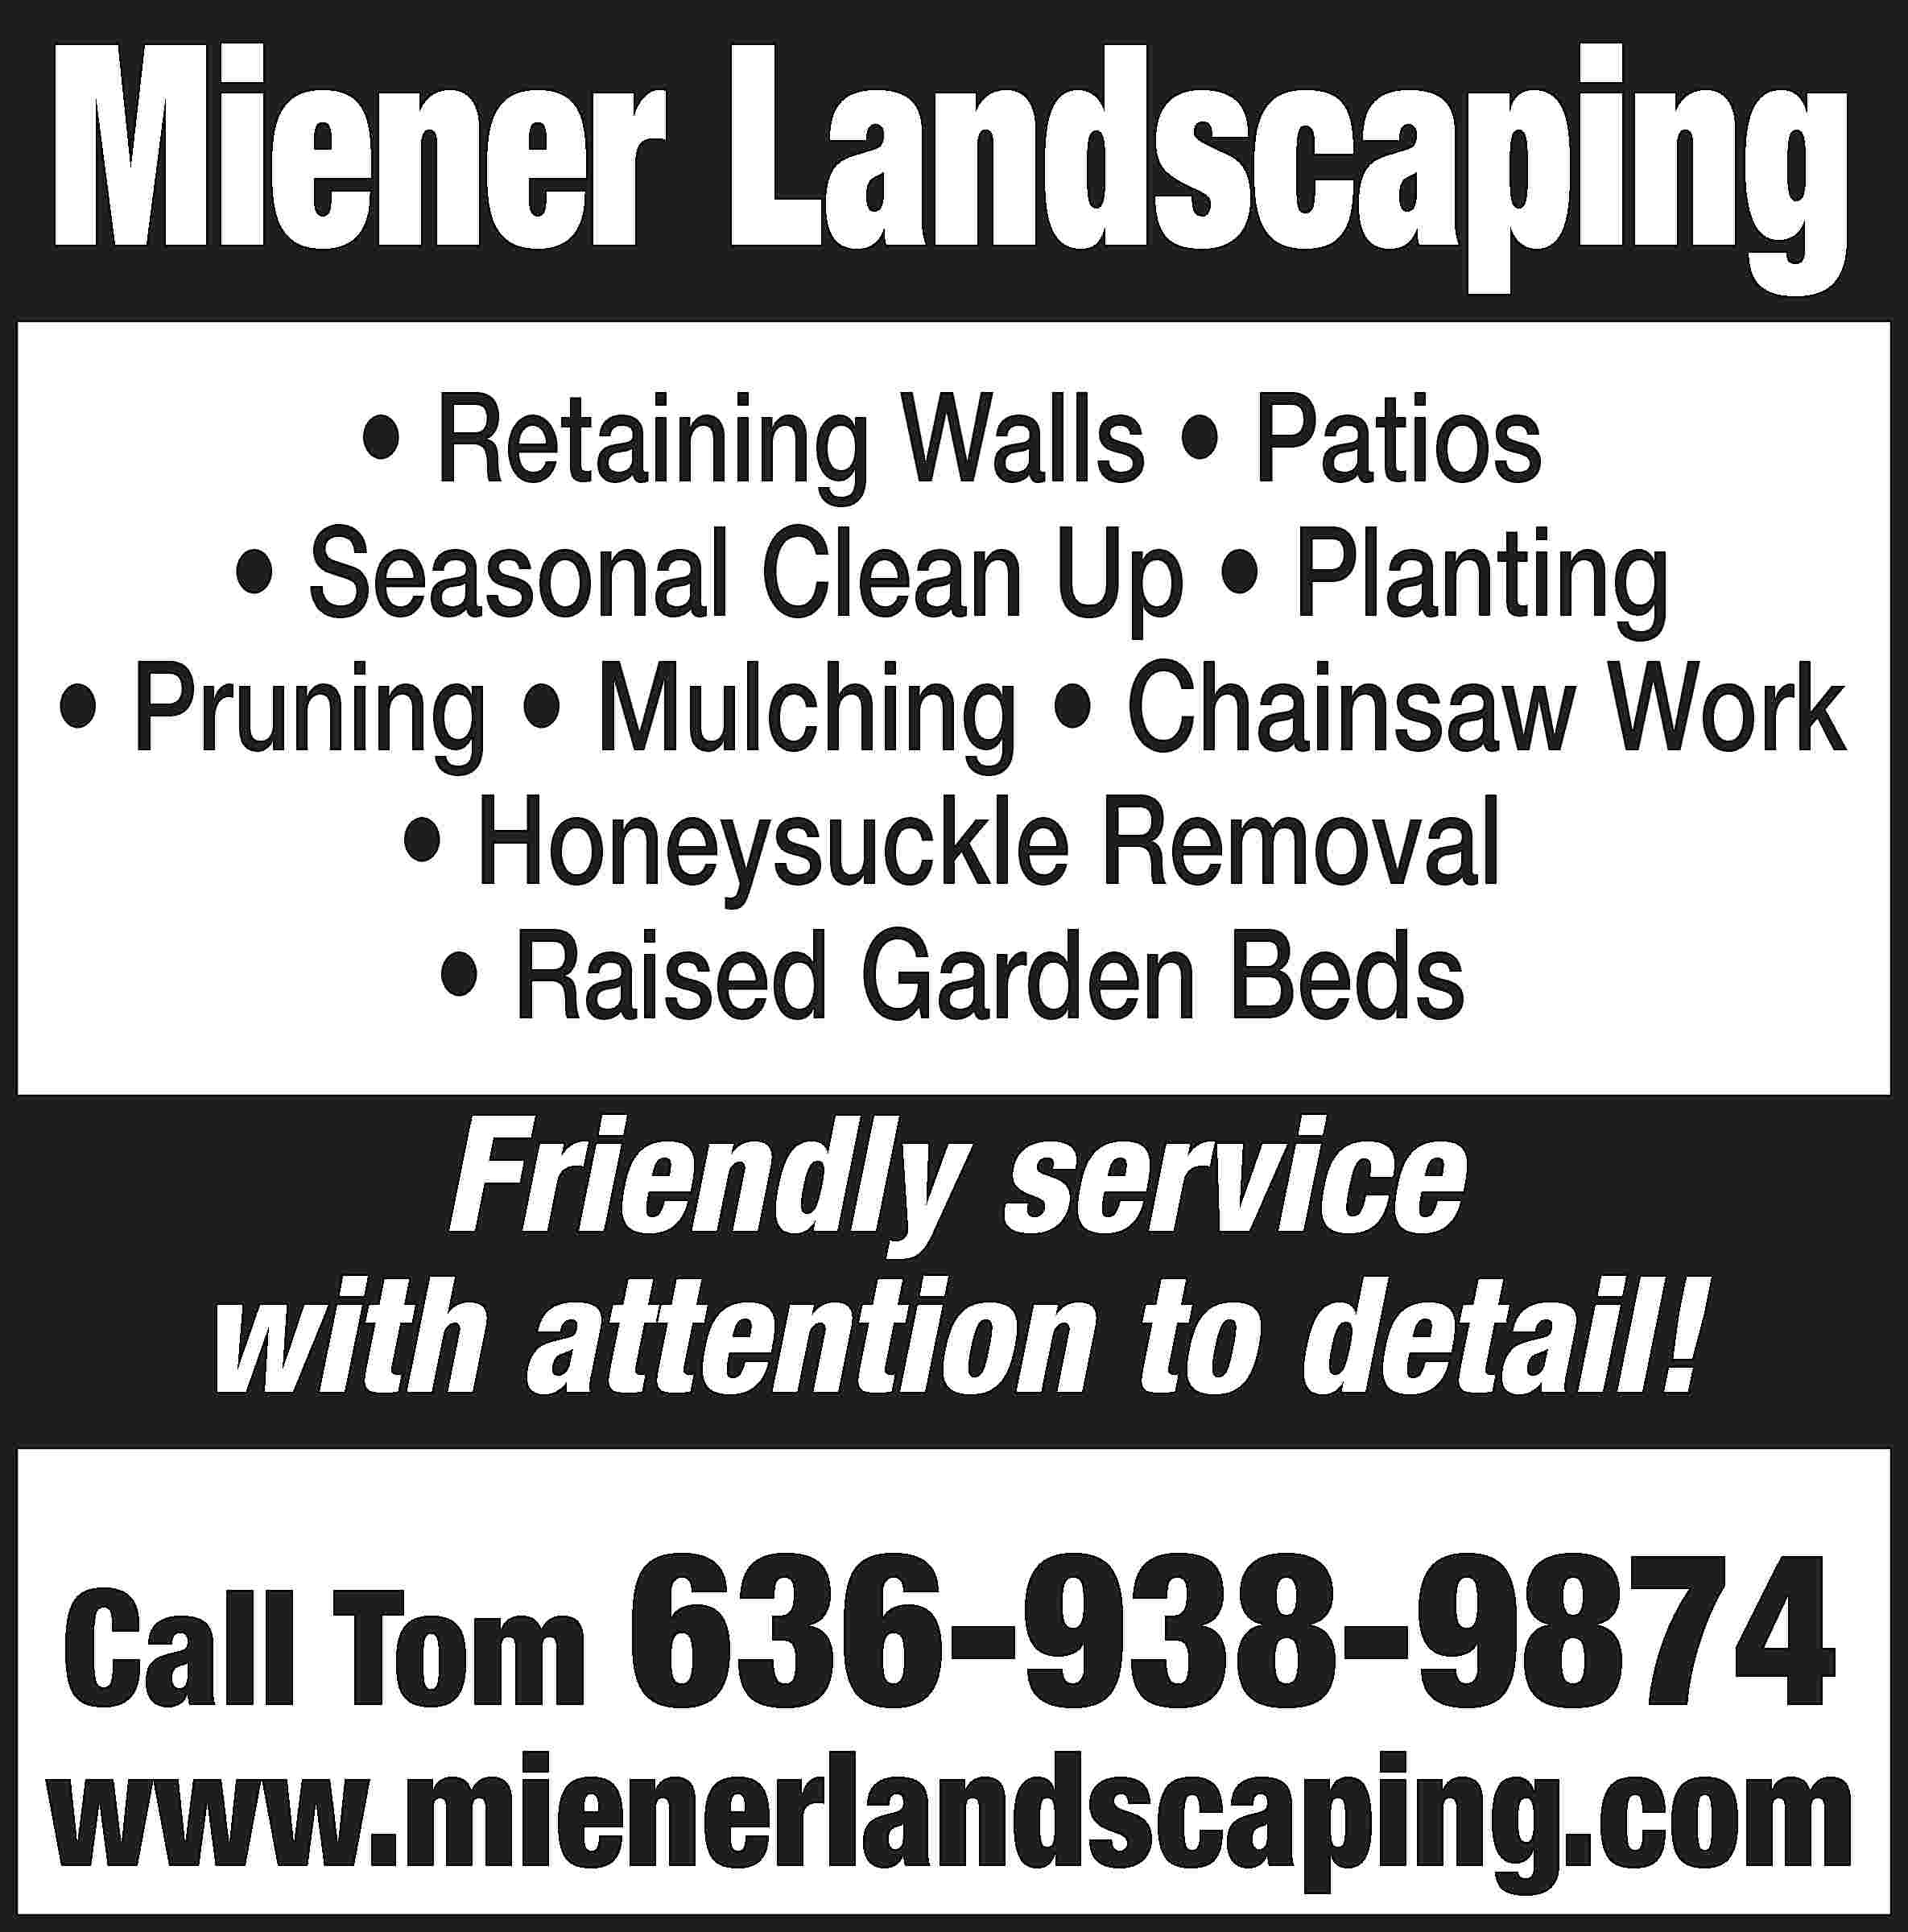 Miener Landscaping • Retaining Walls  Miener Landscaping • Retaining Walls • Patios • Seasonal Clean Up • Planting • Pruning • Mulching • Chainsaw Work • Honeysuckle Removal • Raised Garden Beds Friendly service with attention to detail! Call Tom 636-938-9874 www.mienerlandscaping.com